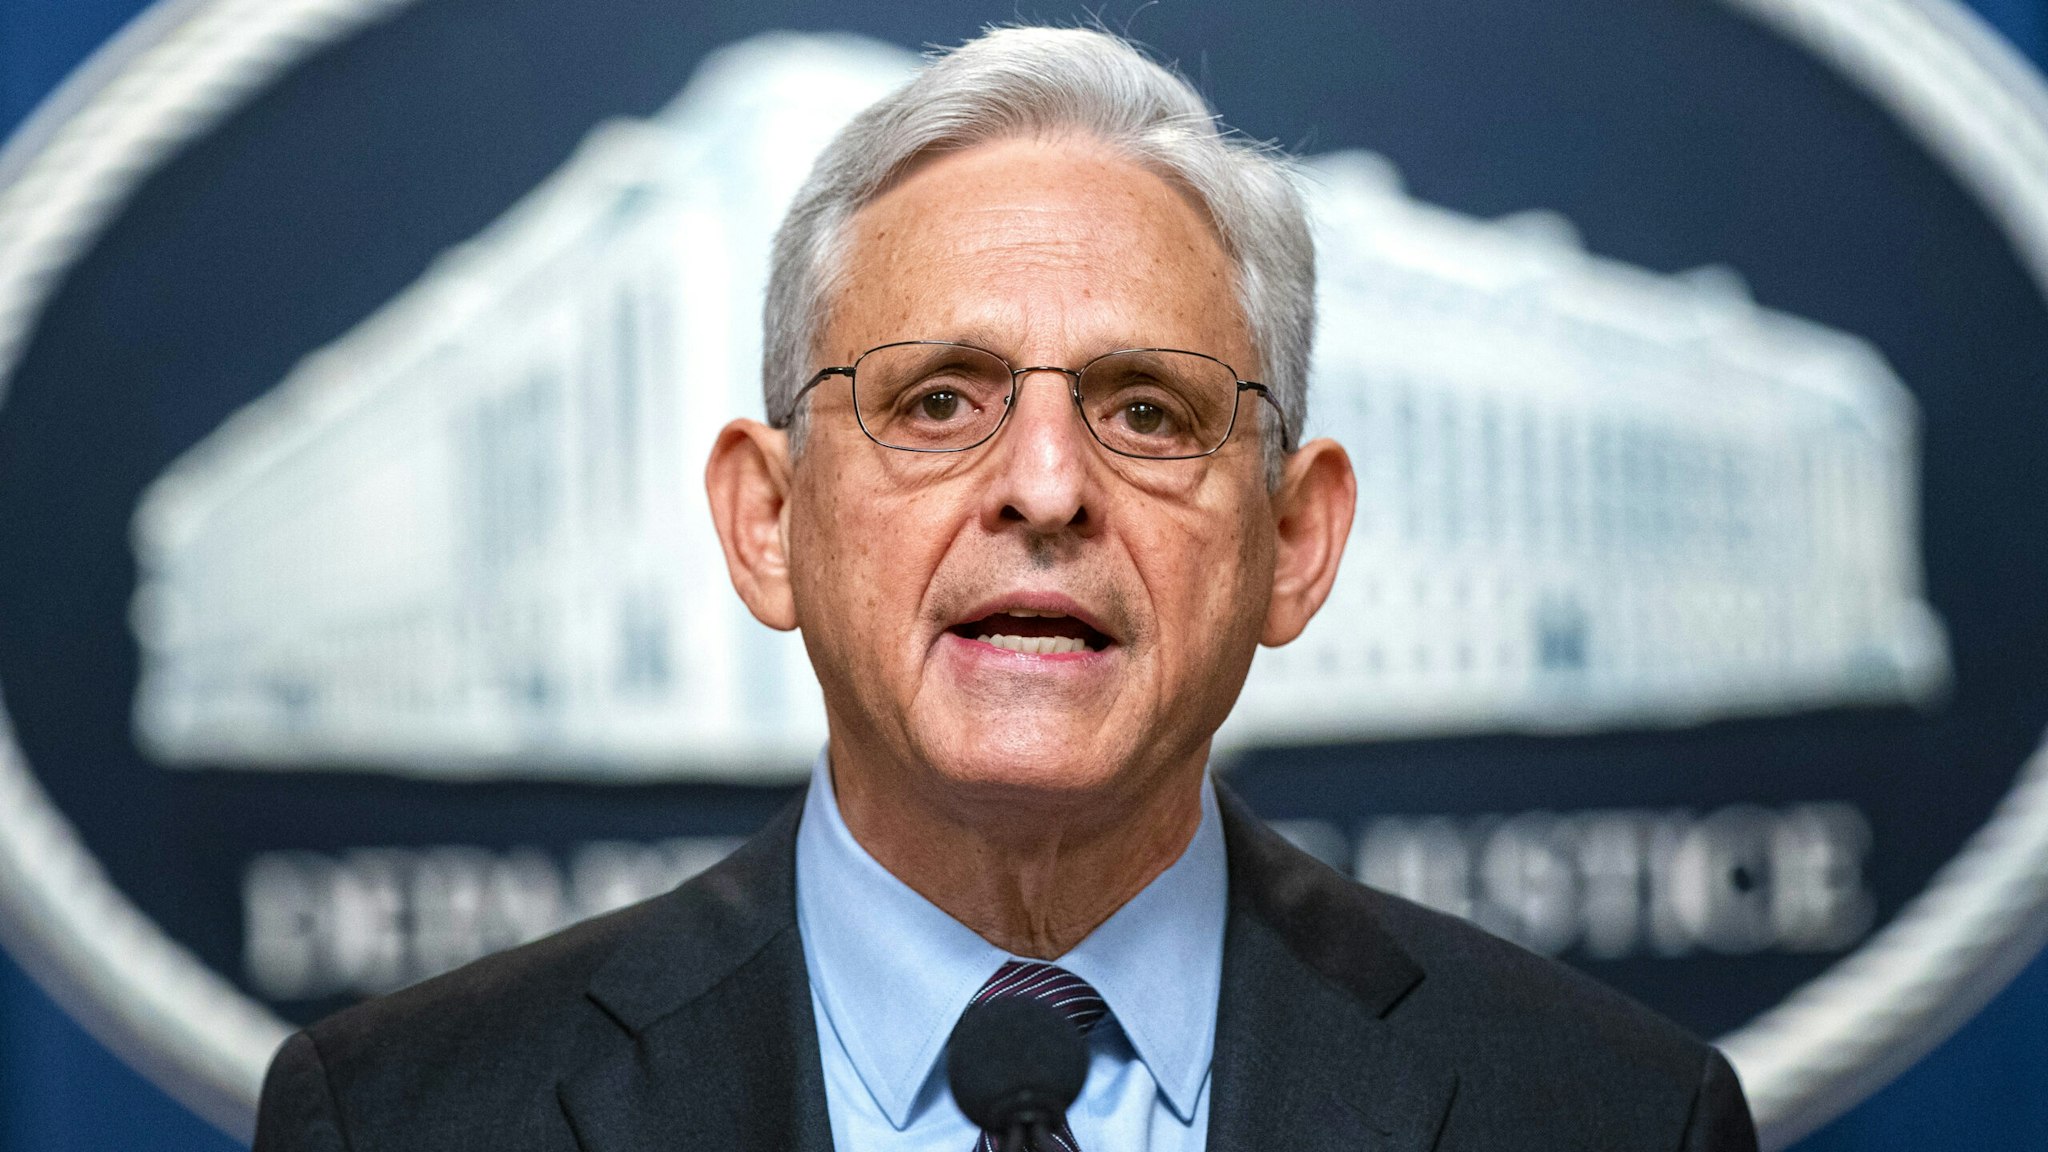 Merrick Garland, US attorney general, speaks during a news conference on the Foreign Corrupt Practices Act at the Department of Justice (DOJ) in Washington, D.C., US, on Tuesday, May 24, 2022. Units of Glencore Plc are pleading guilty to bribery charges as part of a sweeping settlement with authorities in the US and UK to resolve corruption probes that have hung over the commodities giant for years.